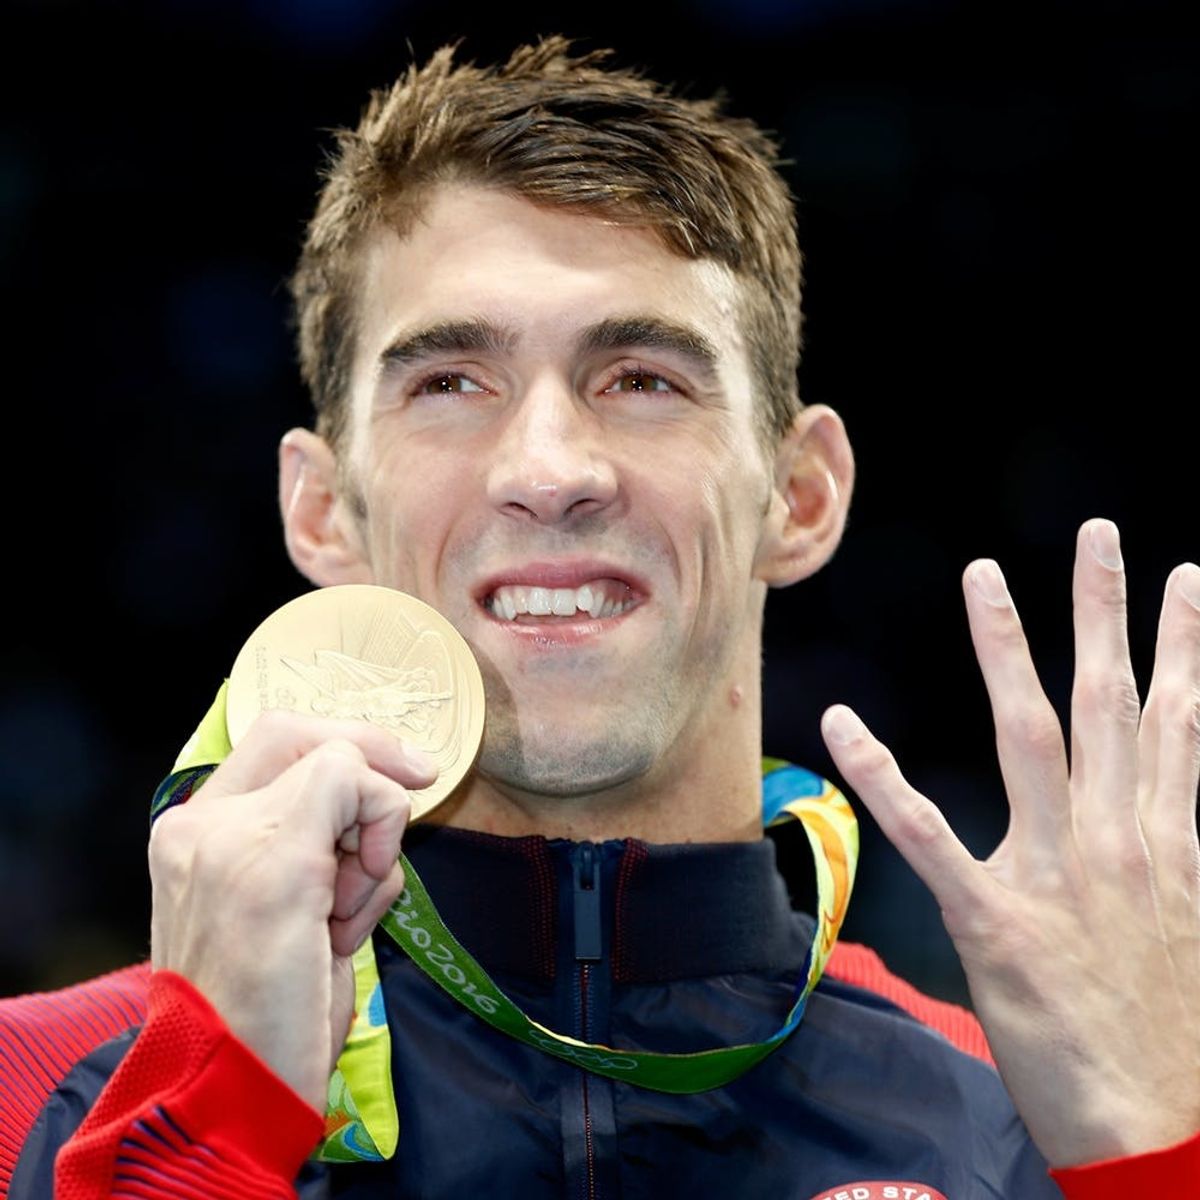 THIS Is How Michael Phelps Spent His First Day of Retirement